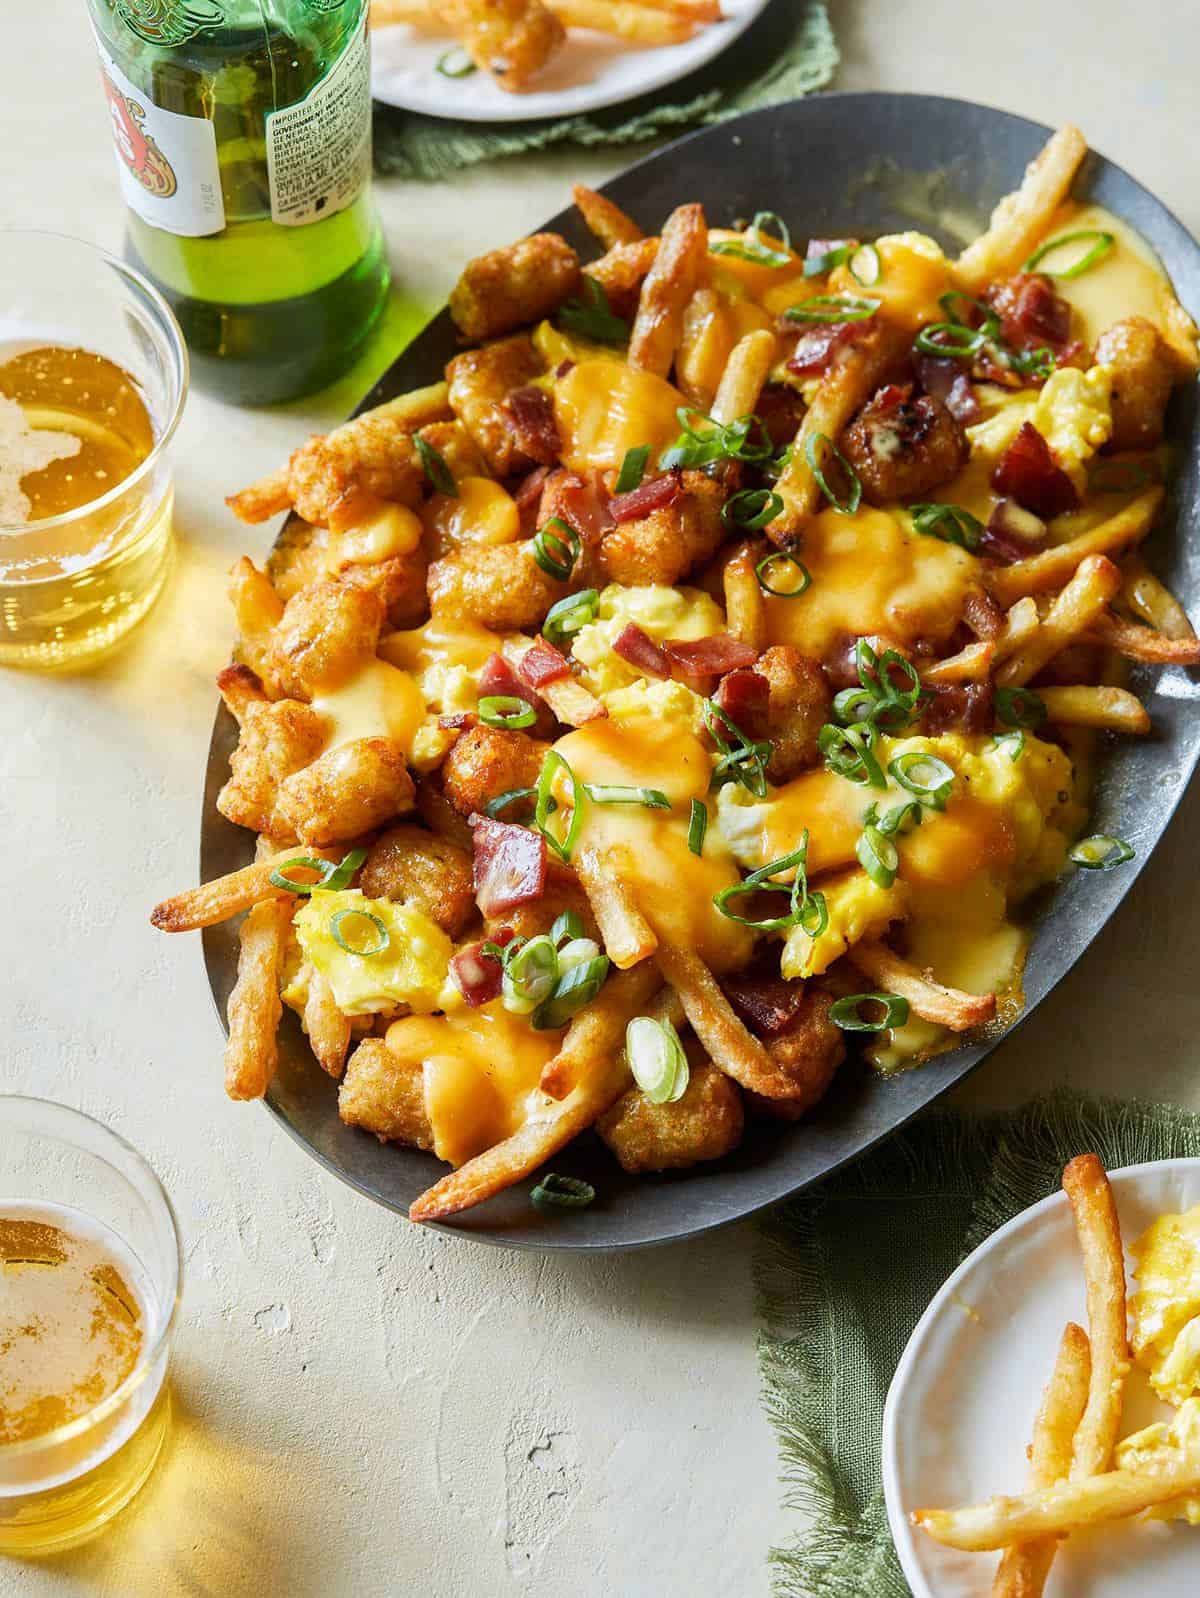 Breakfast Poutine with Hollandaise Sauce